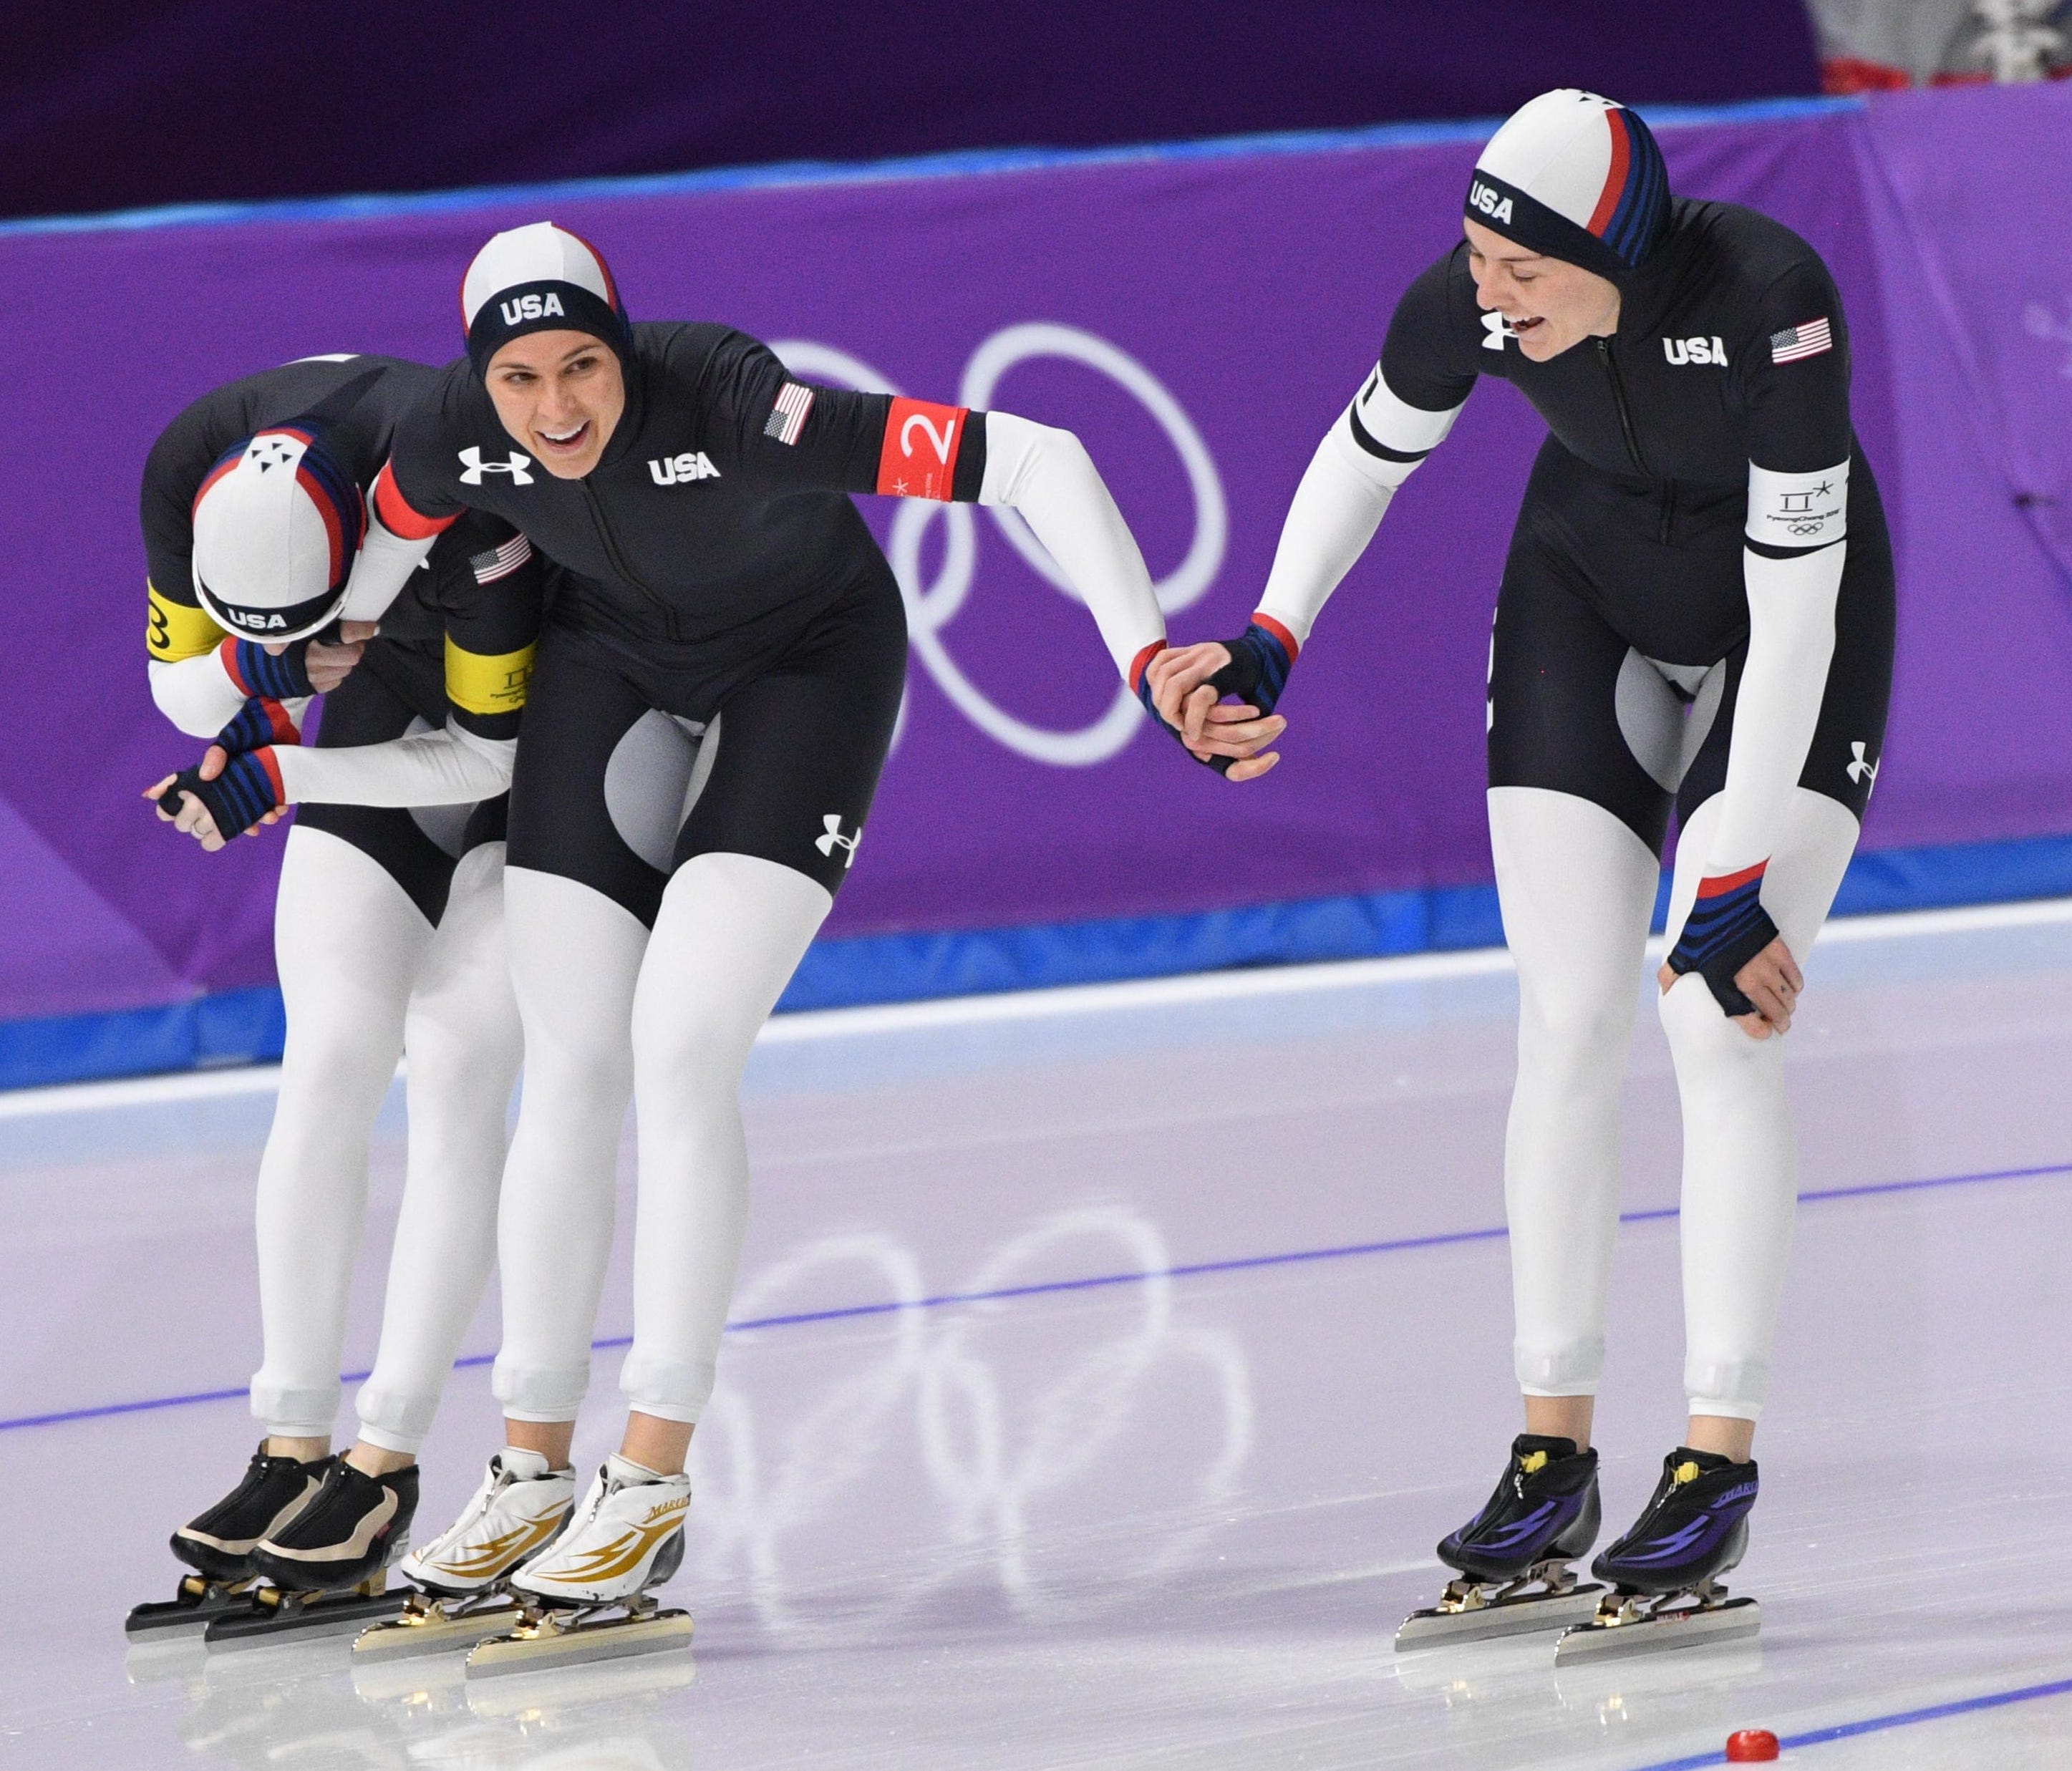 Team USA's Mia Manganello, left, Britany Bowe, center, and Heather Bergsma celebrate after winning the bronze medal in the ladies' speedskating team pursuit.